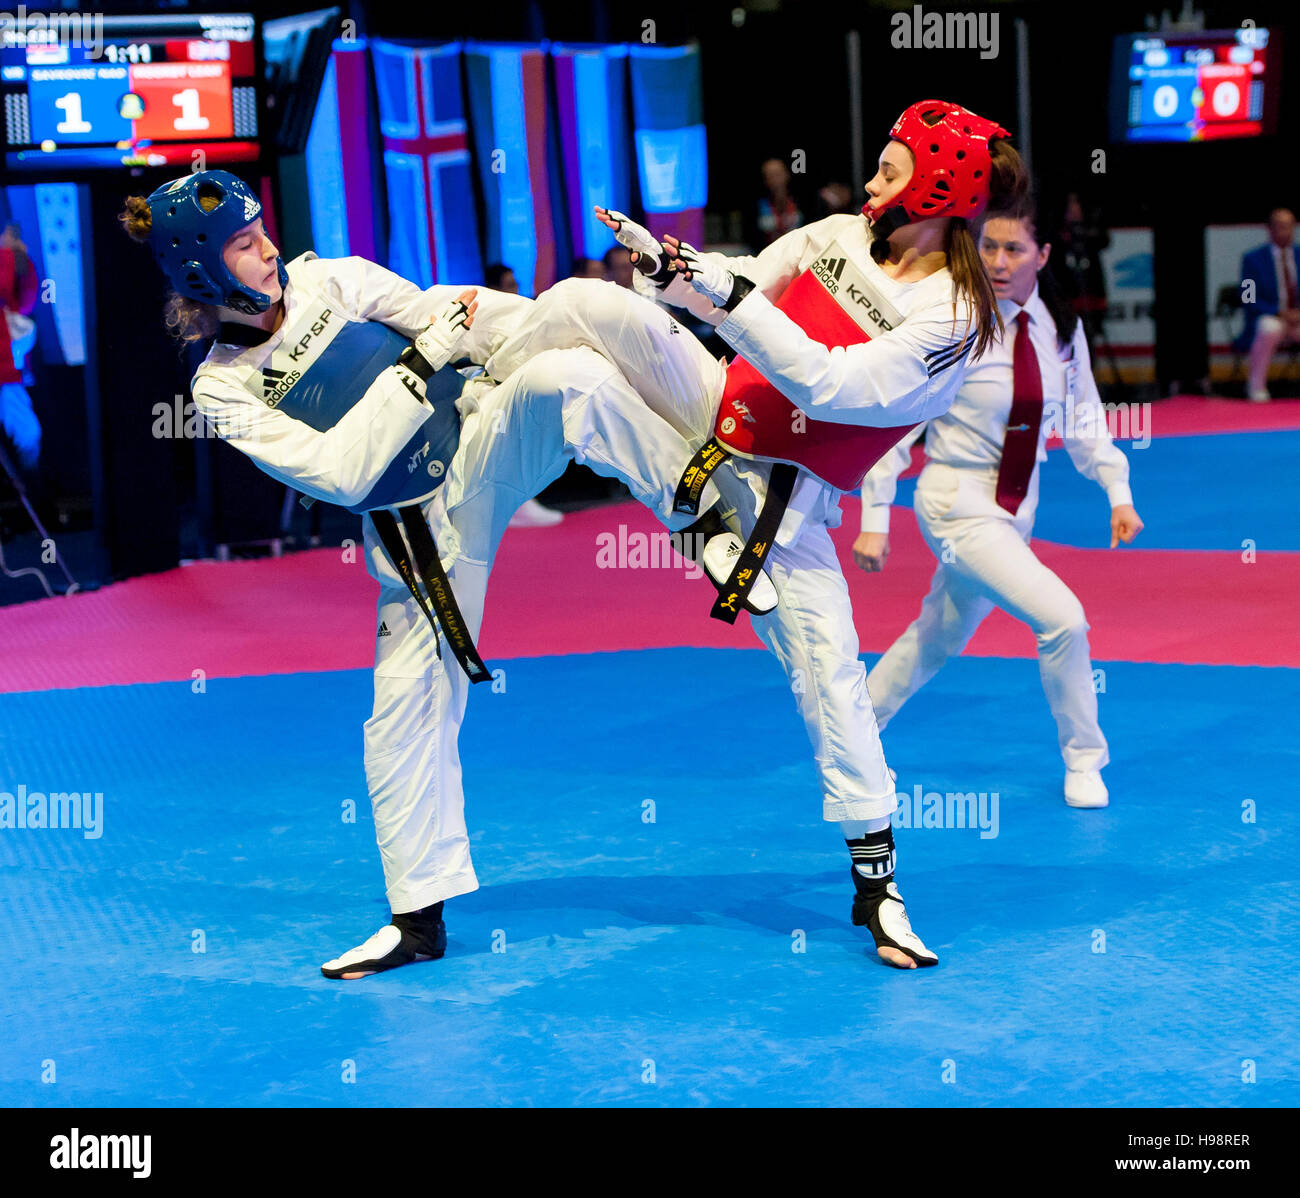 Burnaby, Canada. 19 November, 2016. WTF World Taekwondo Junior Championships Nadia Savkovic (SRB) blue, and Leah Moorby (GBR) red compete in the female 59kg Alamy Live News/Peter Llewellyn Stock Photo